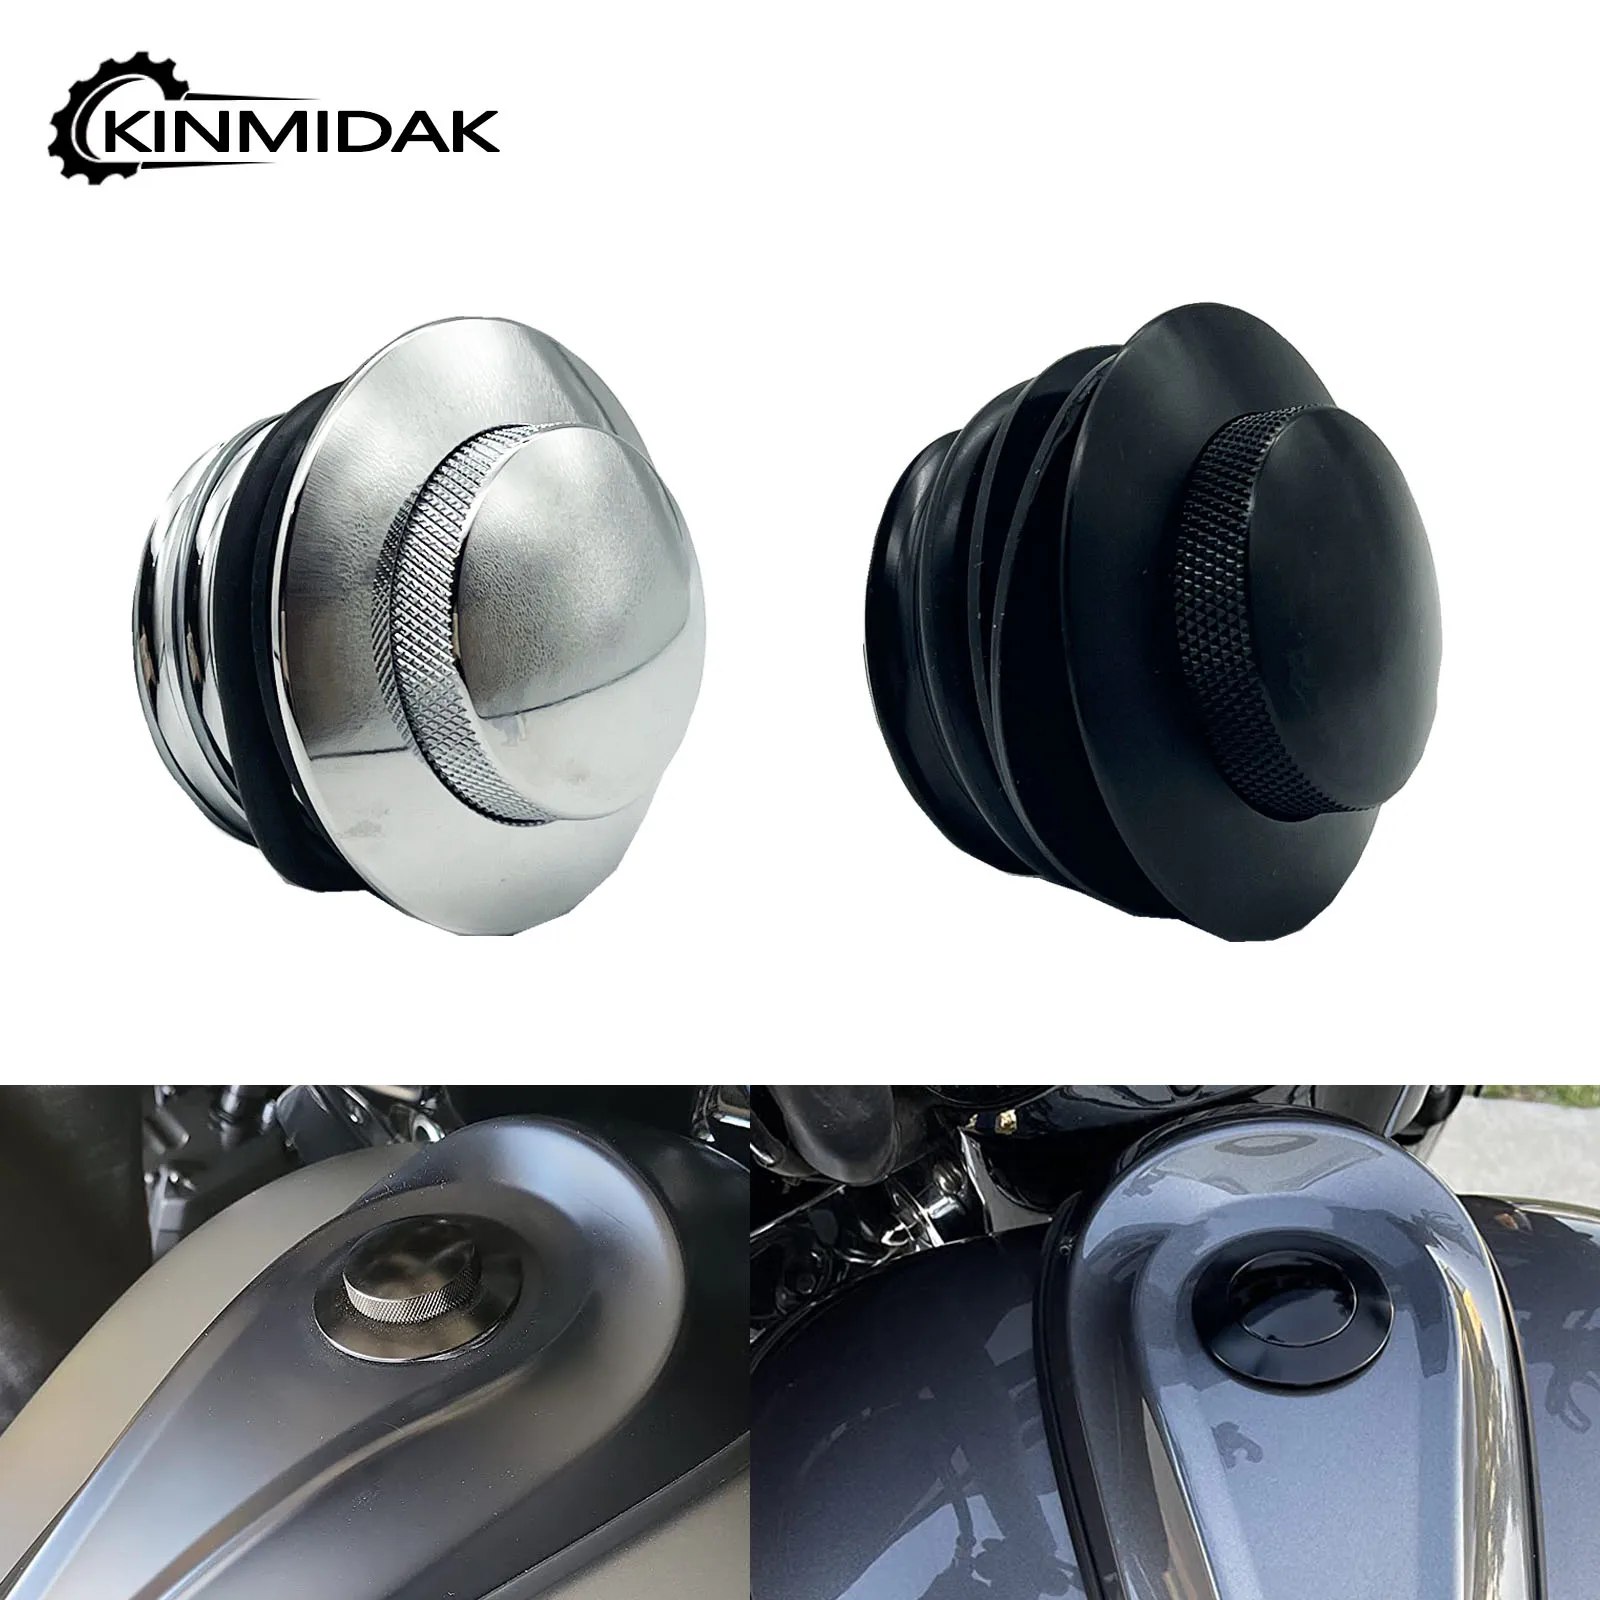 

Motorcycle Pop-up Tank Gas Cap Vented Flush Mount Fuel Filler Cap For Harley Touring Glide Road King Dyna Fat Bob Softail Fatboy